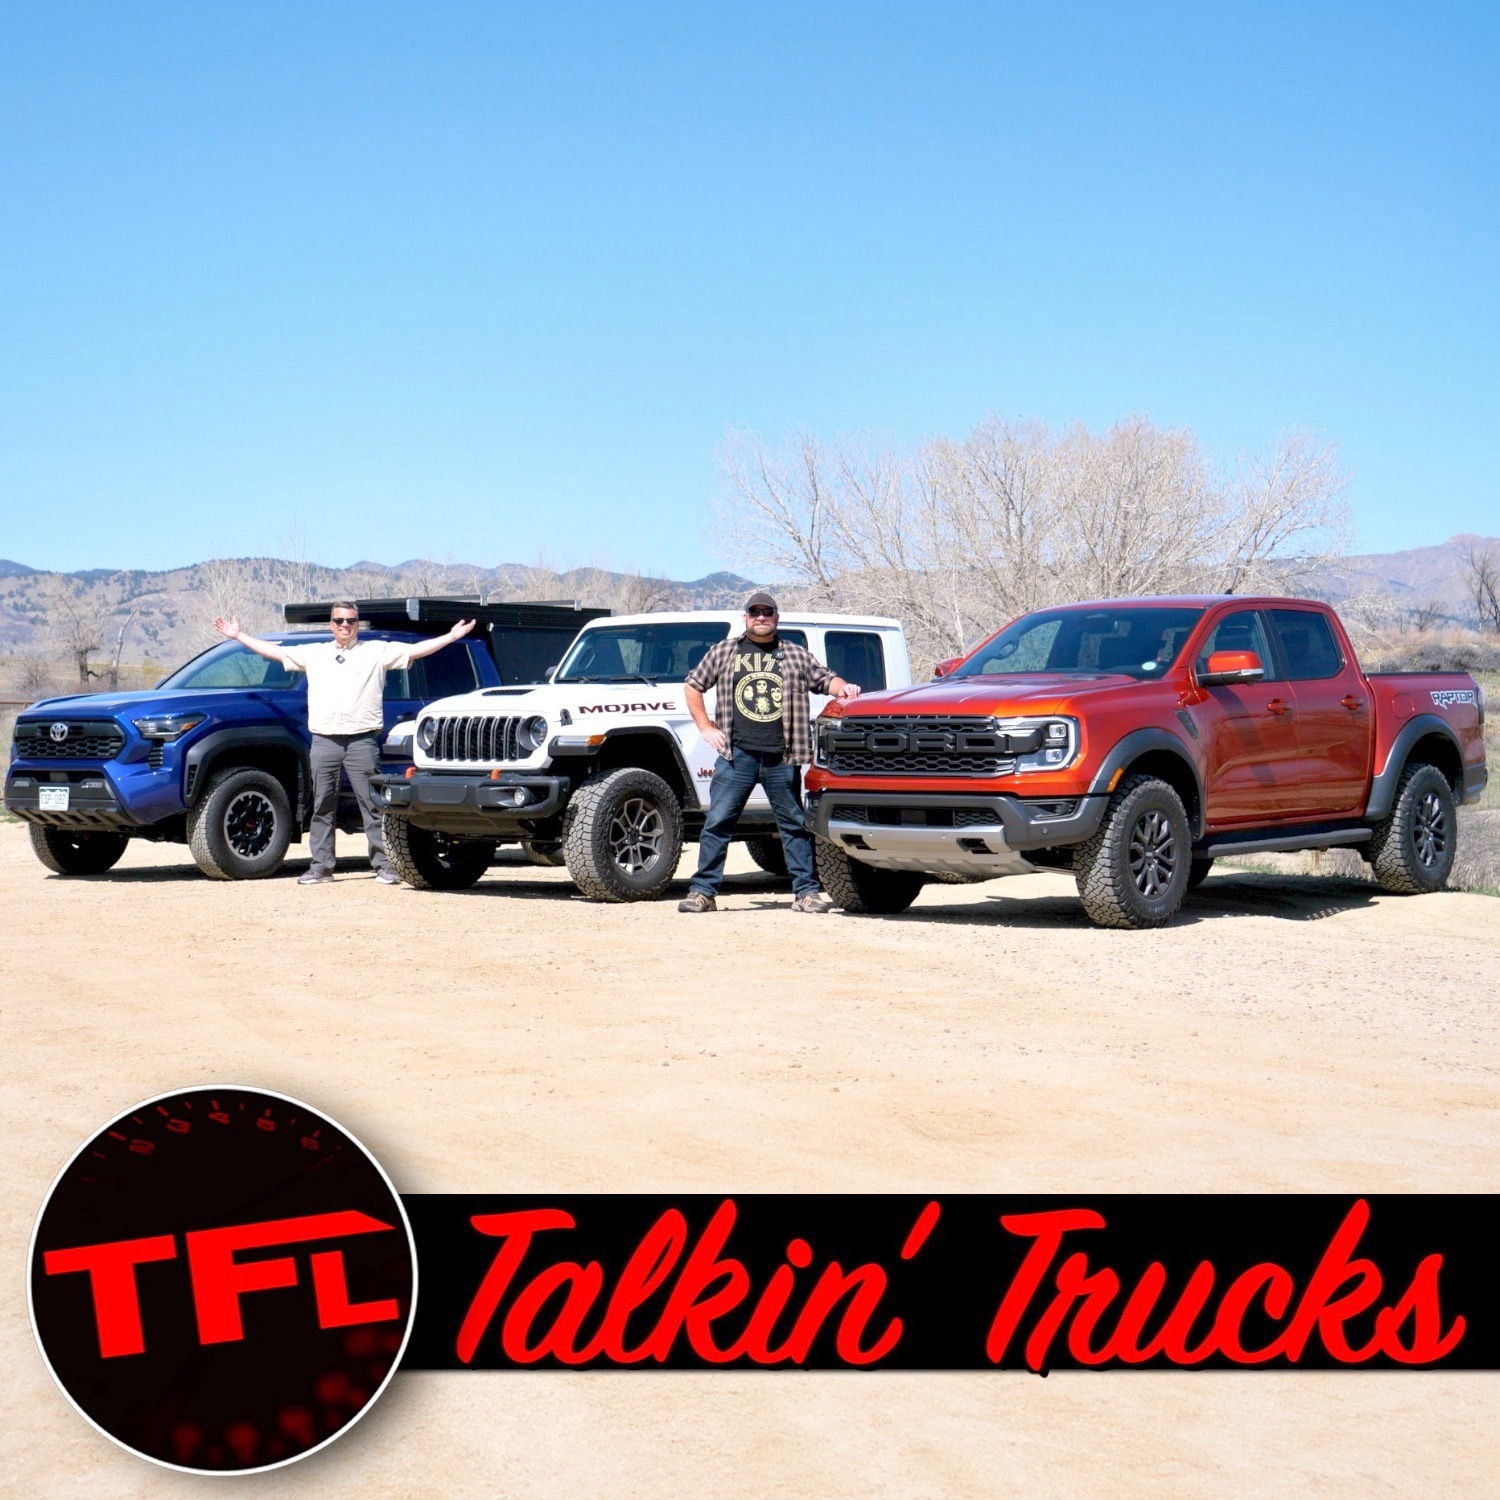 Ep. 223: The All New Ford Ranger Raptor vs Toyota and Jeep; What Do You Get For $45k, $55k, and $65k?